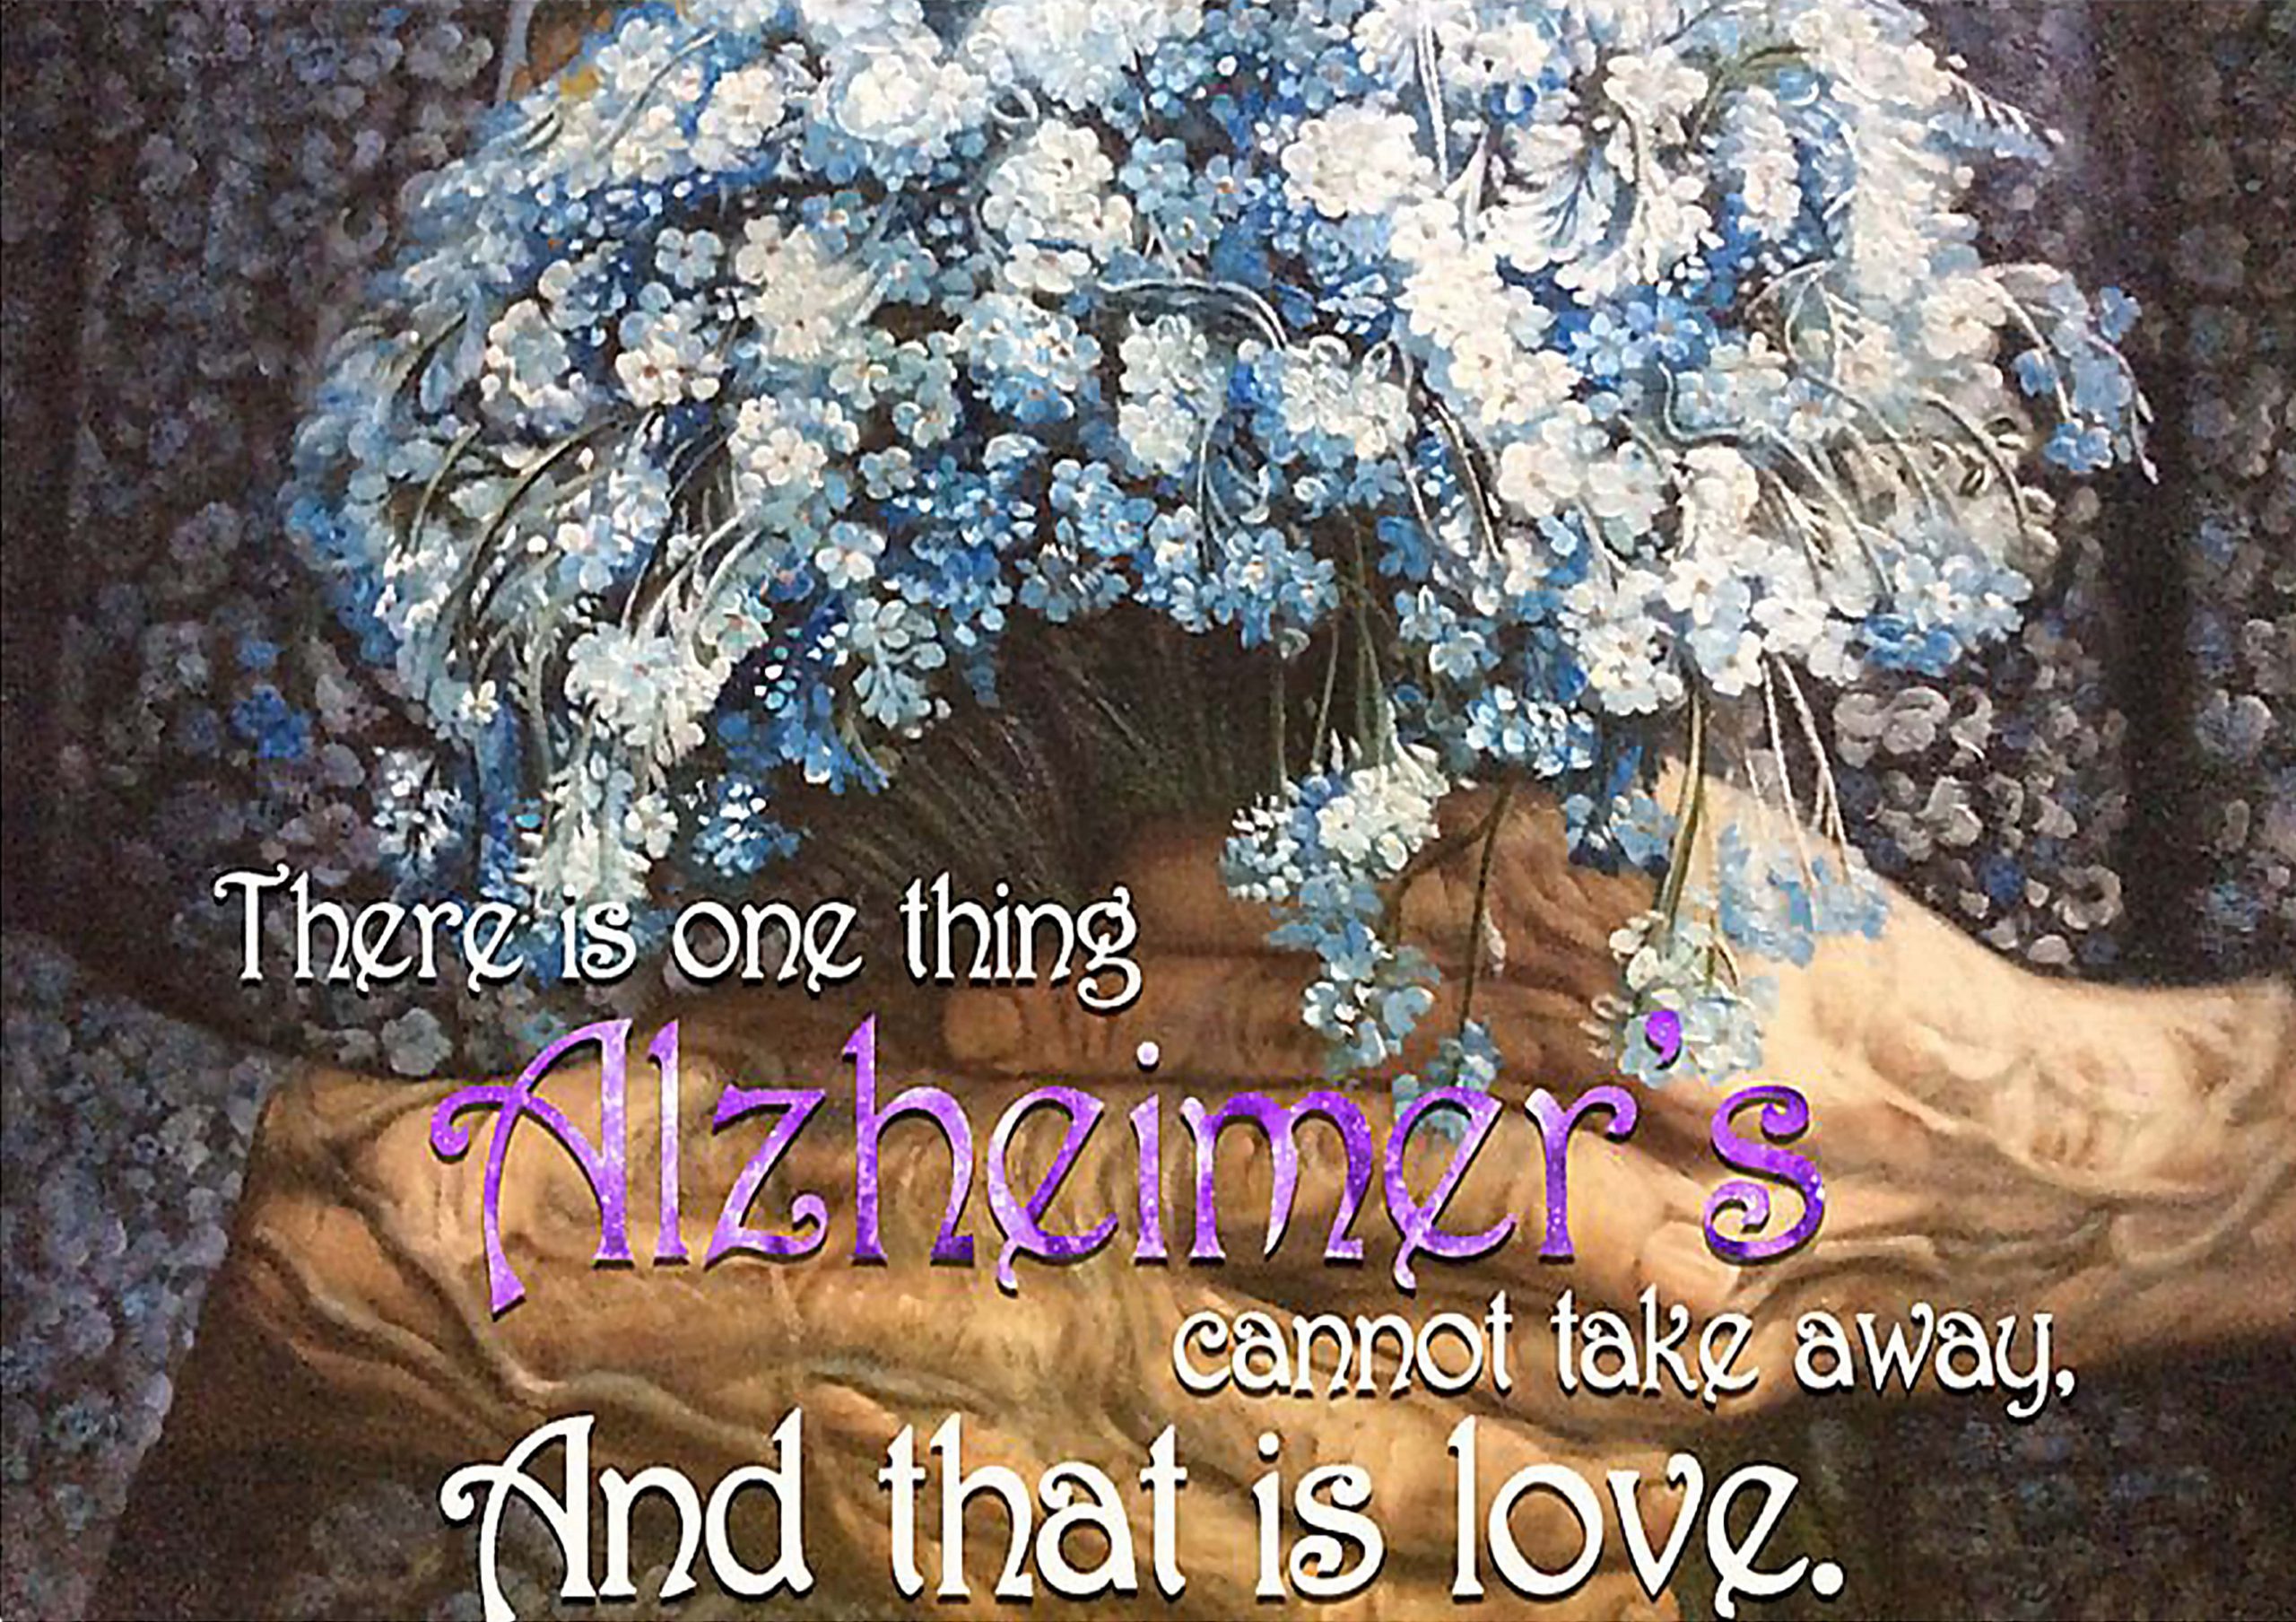 old lady with flower there is one thing alzheimers cannot take away and that is love poster 1 - Copy